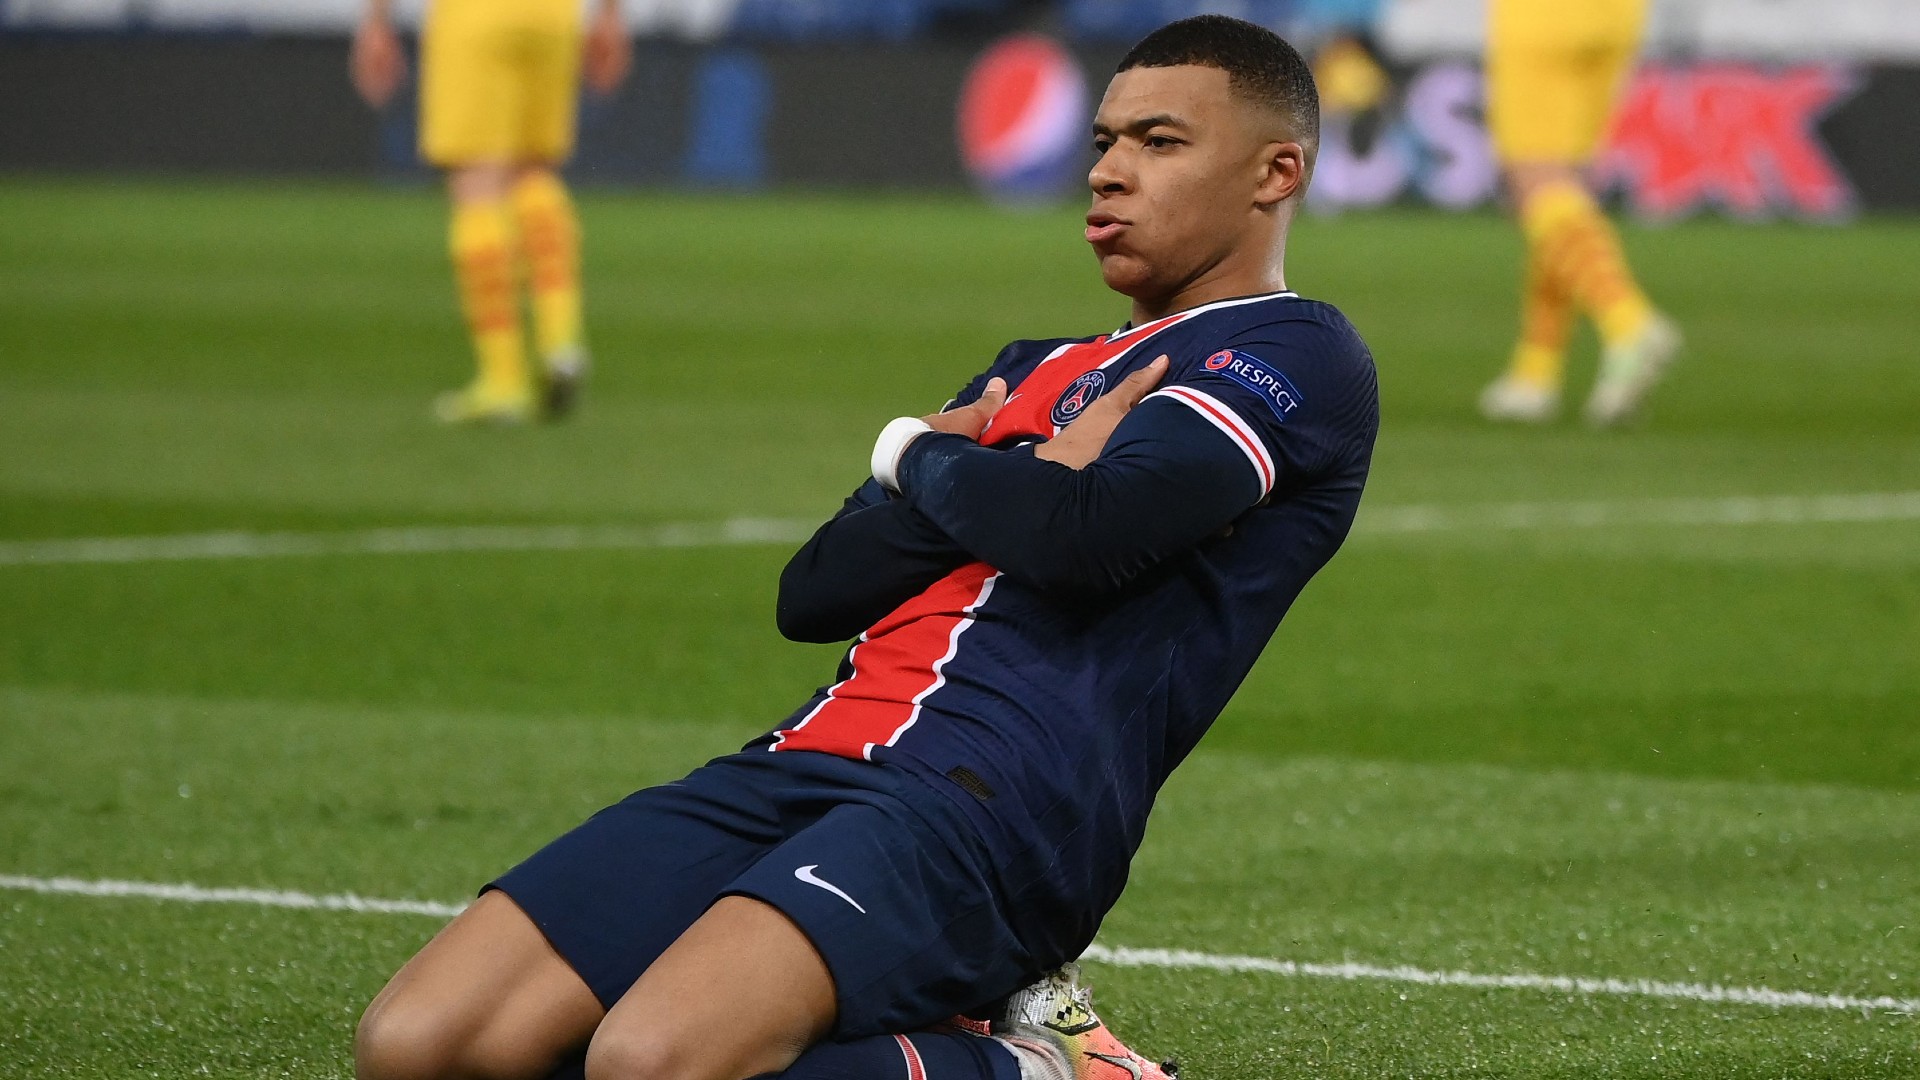 Mbappe breaks Messi record as PSG star becomes youngest player to